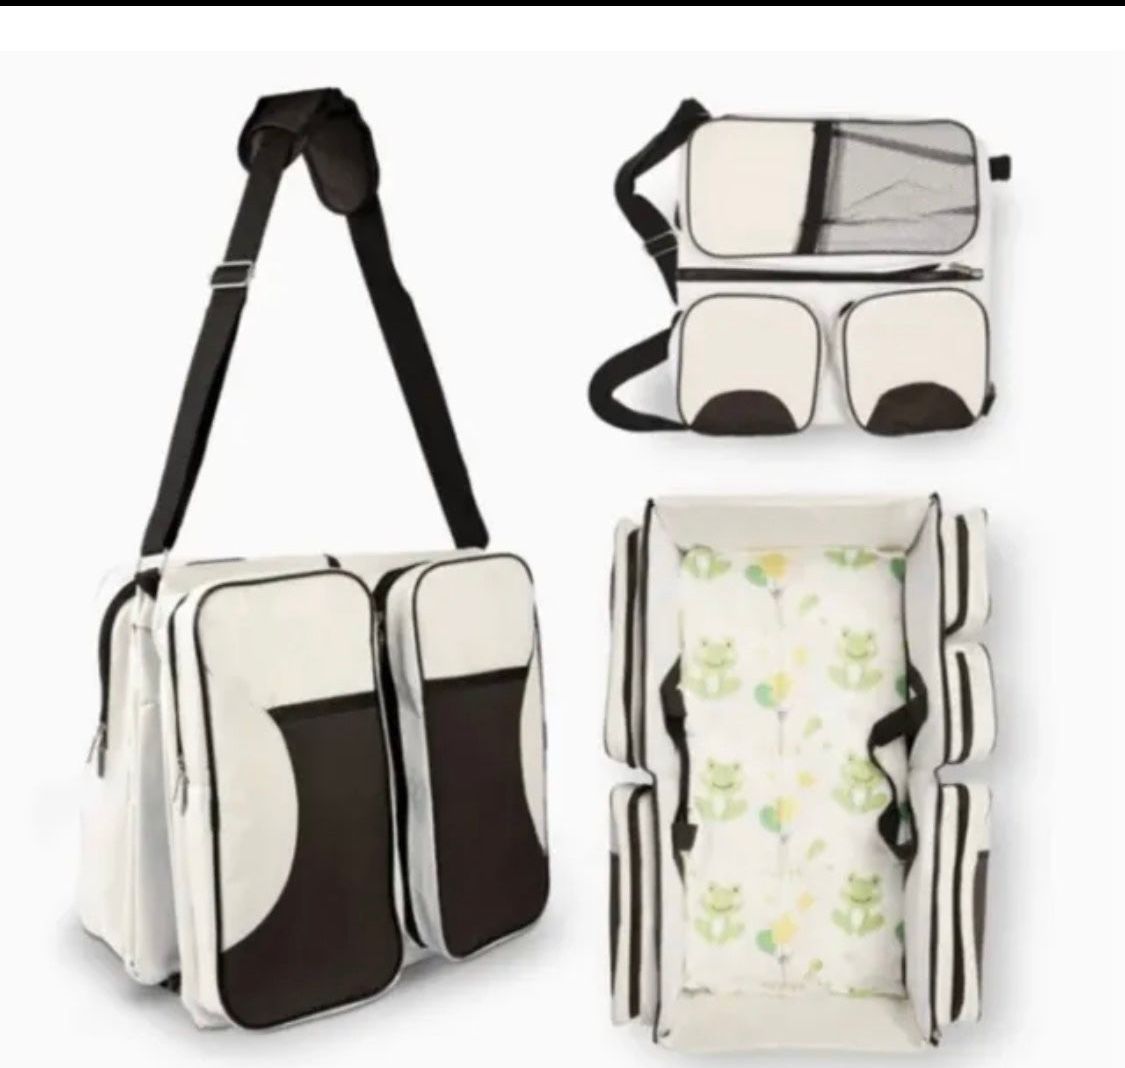 Parisanti Diaper Bag With Bed! Modern Bag, Bassinet And Changing Pad In 1!